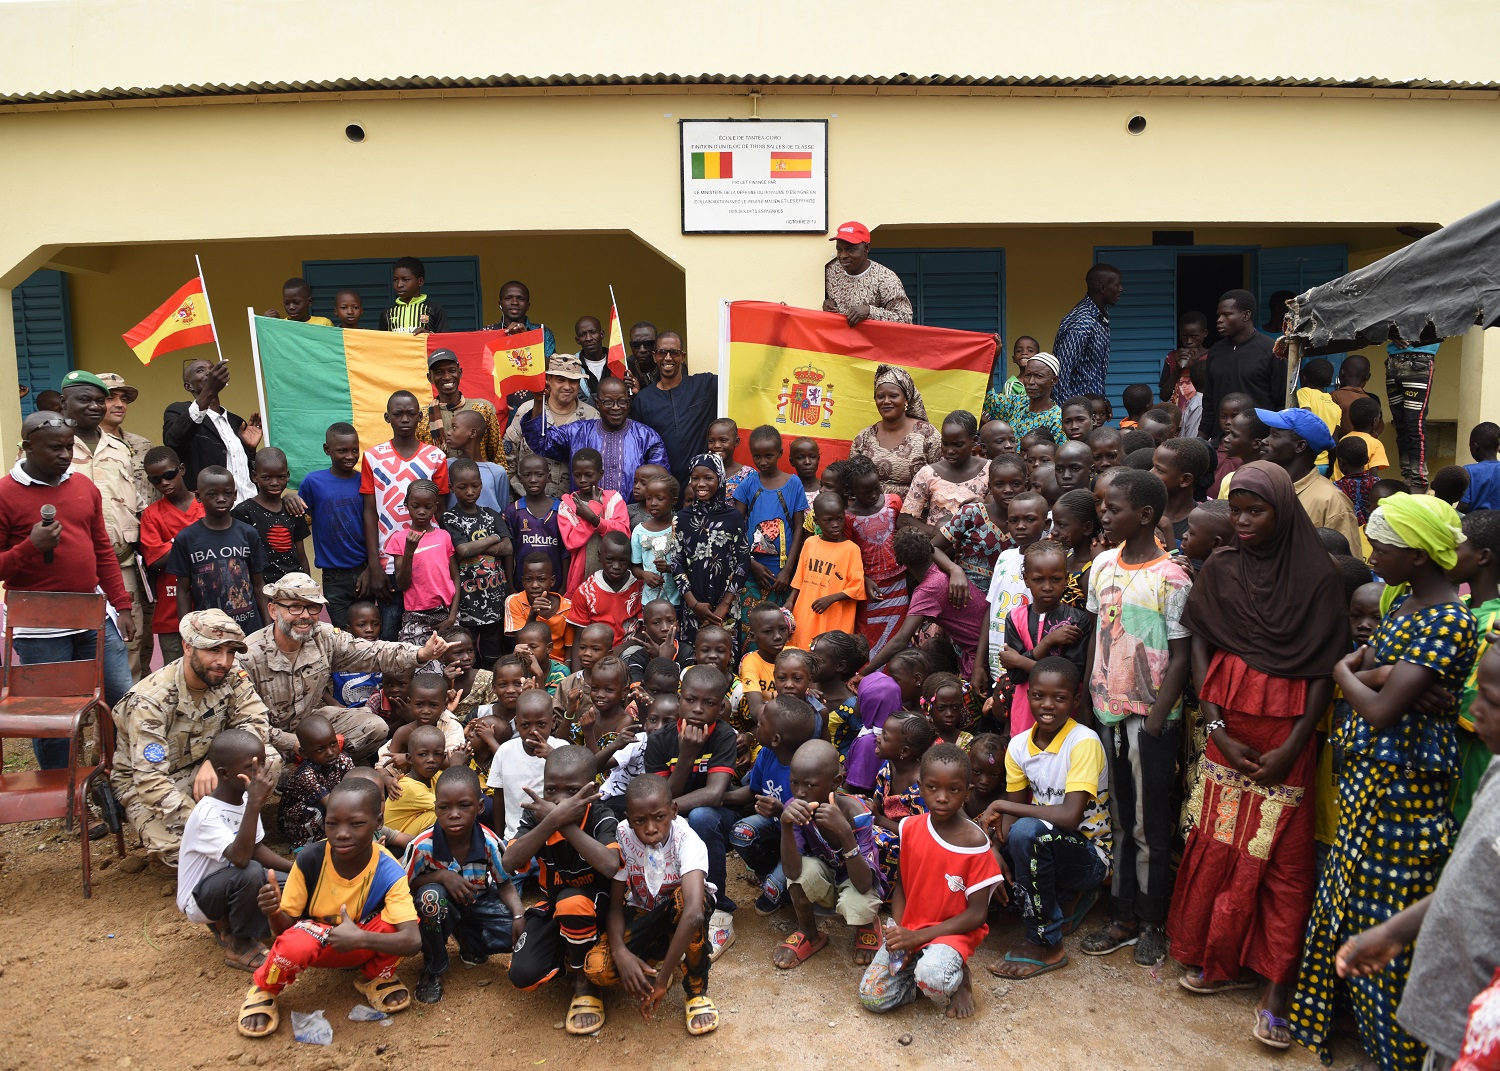 Spanish soldiers in Mali support education as a development tool